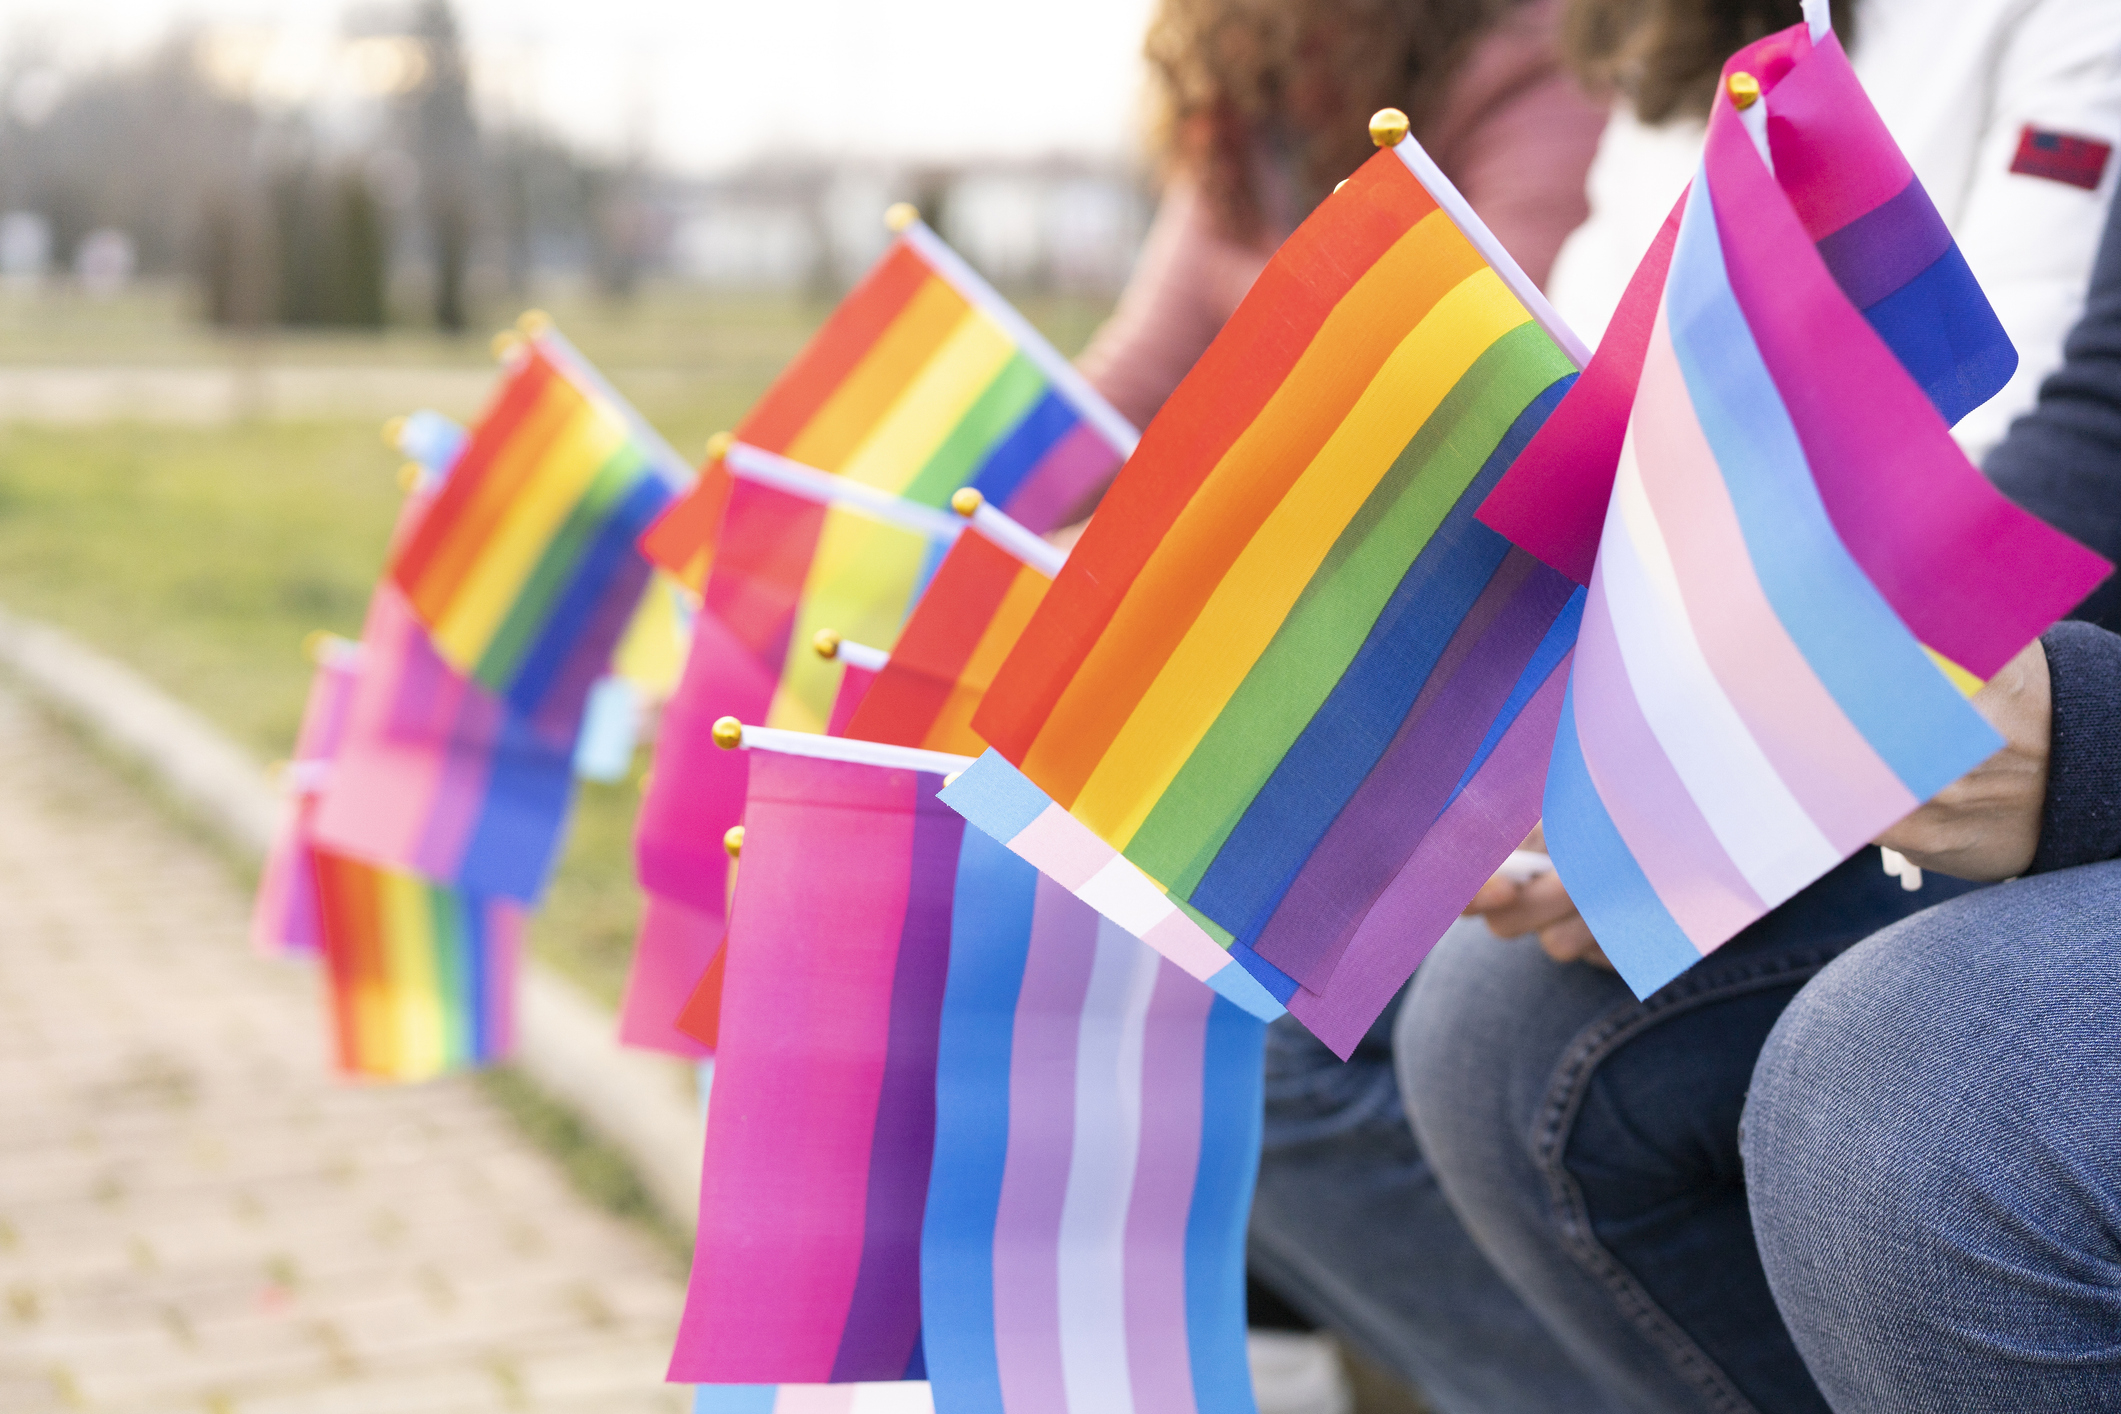 People holding rainbow and transgender pride flags, seated outdoors